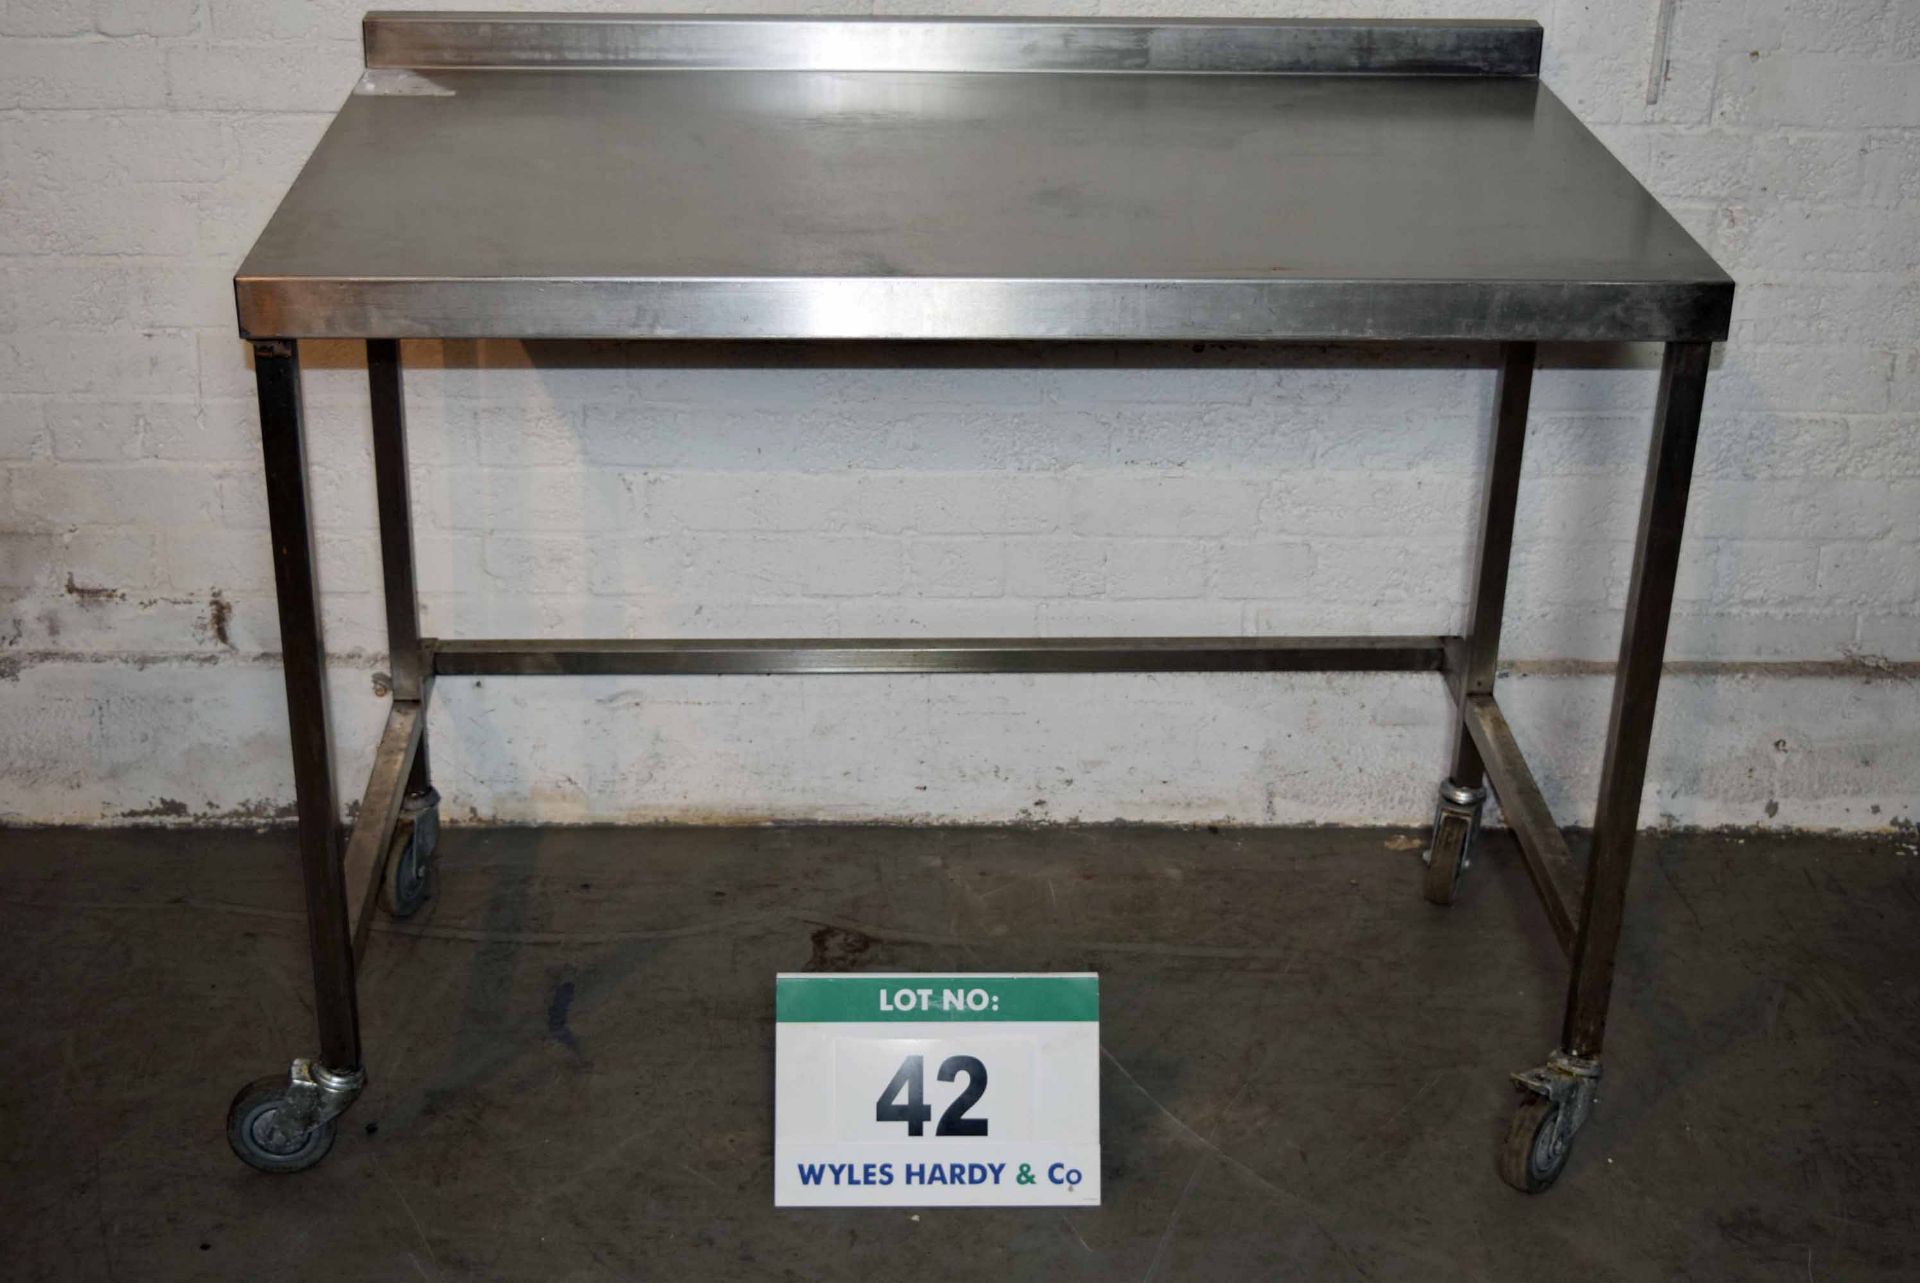 A 1200mm x 700mm Stainless Steel Preparation Table